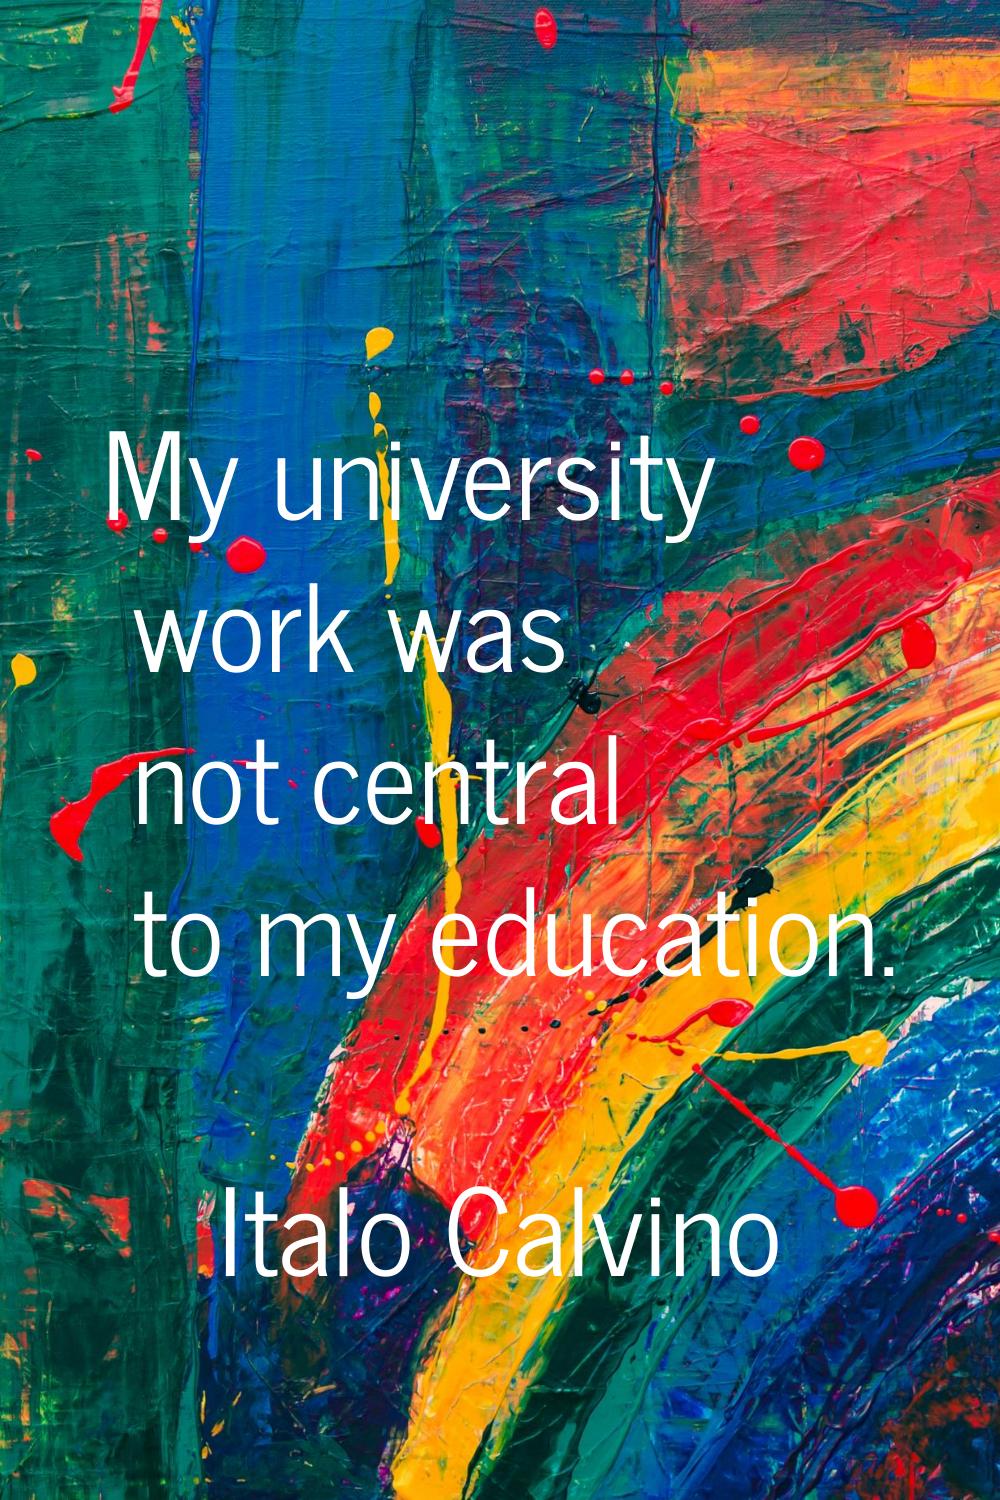 My university work was not central to my education.